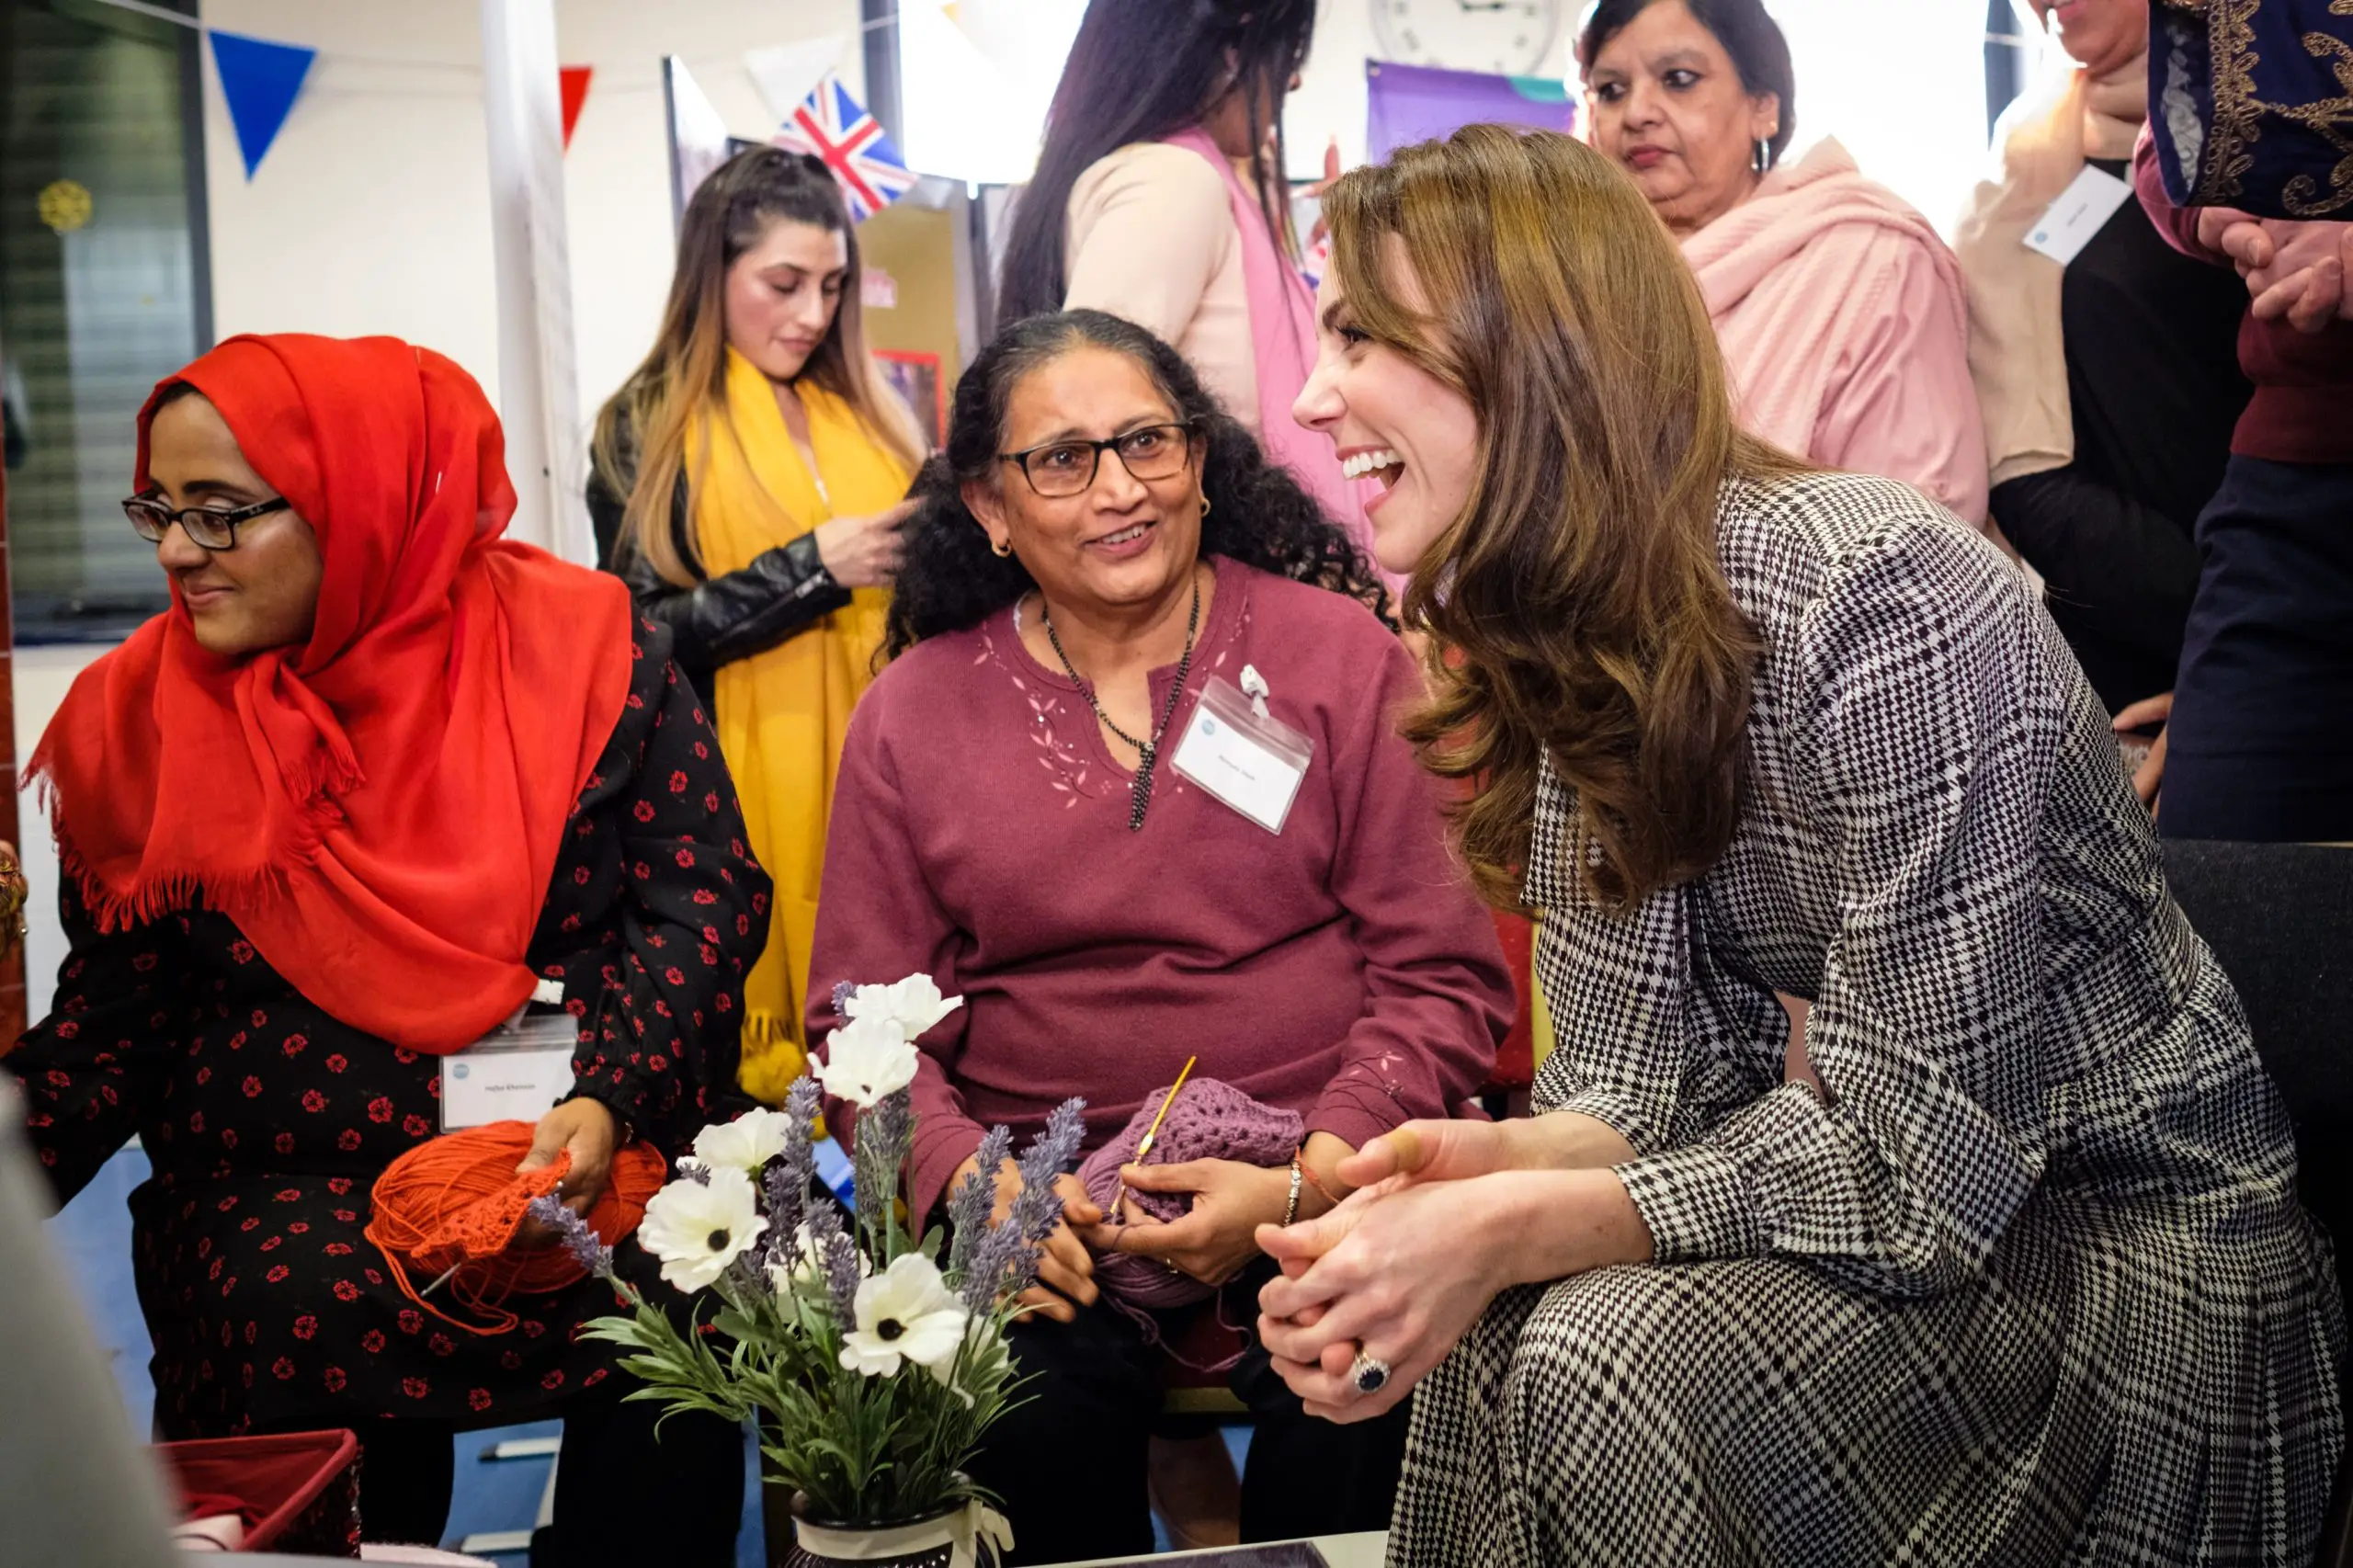 The Duke and Duchess of Cambridge visited Bradford in 2020